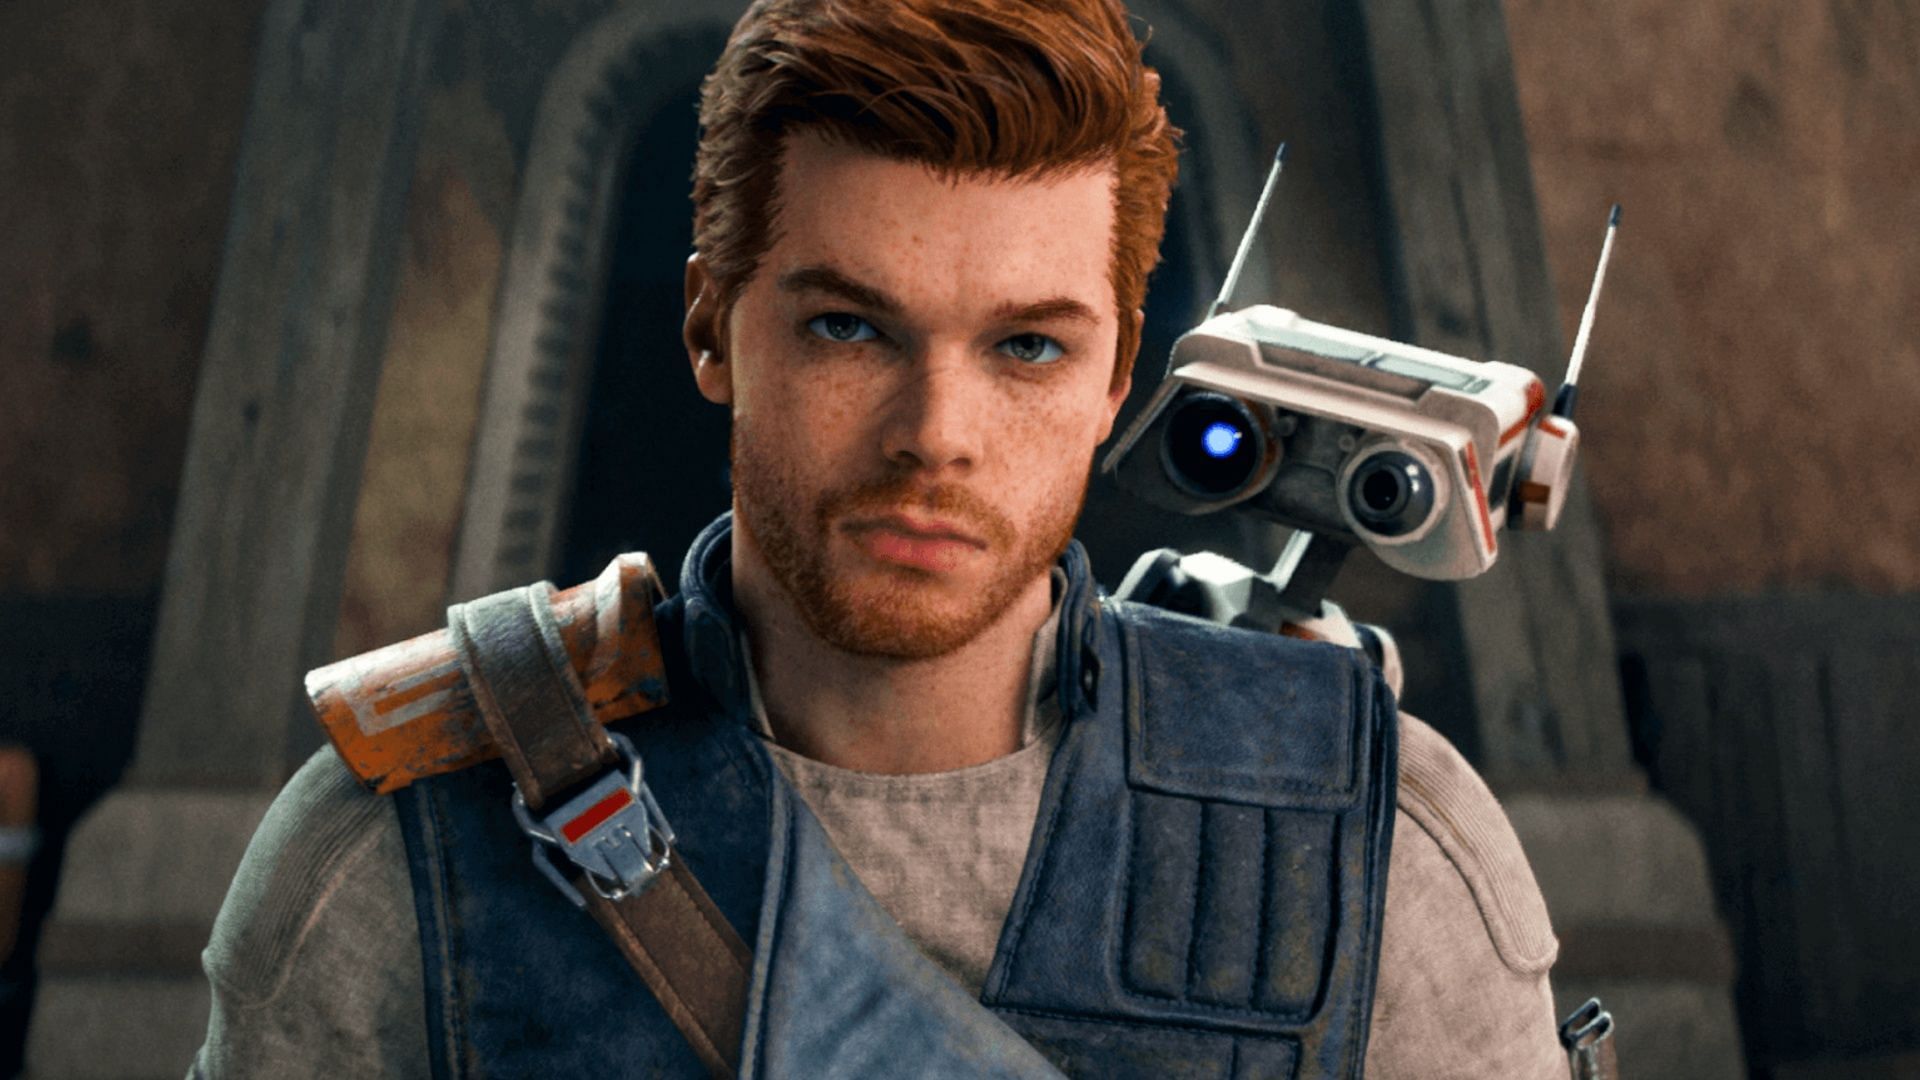 Cal Kestis is one of the best protagonists the franchise has come up with in years (Image via EA)